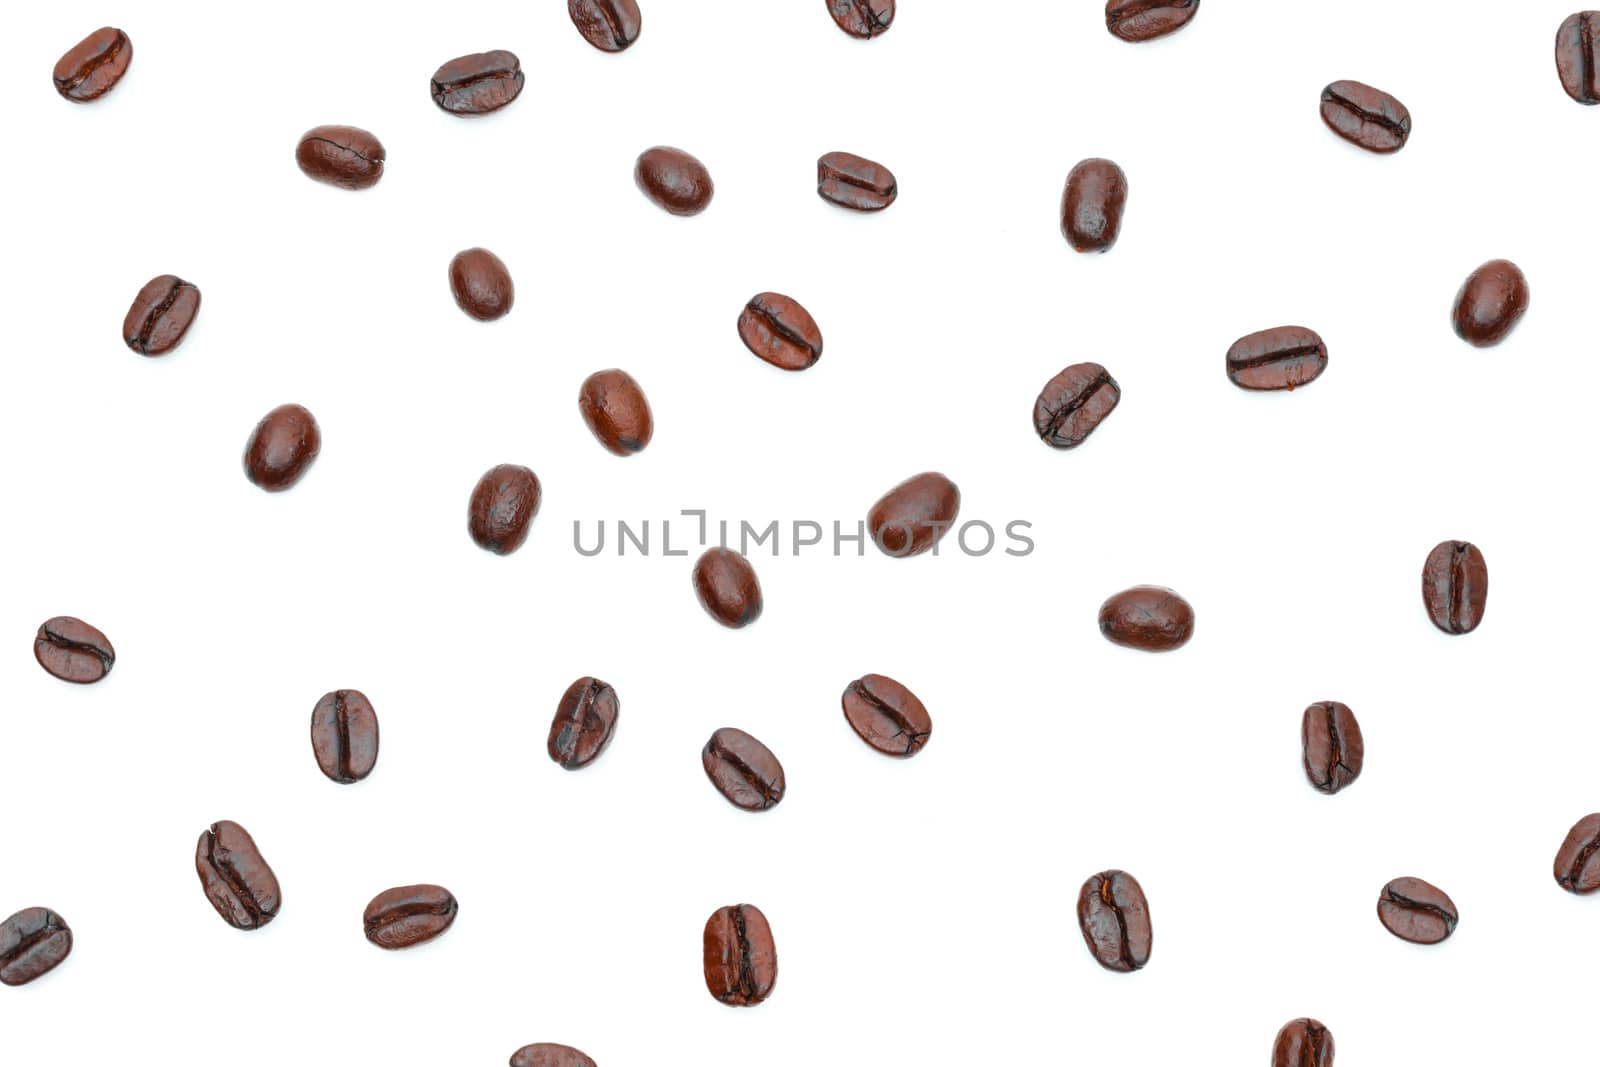 Roasted coffee beans in a white background by sompongtom